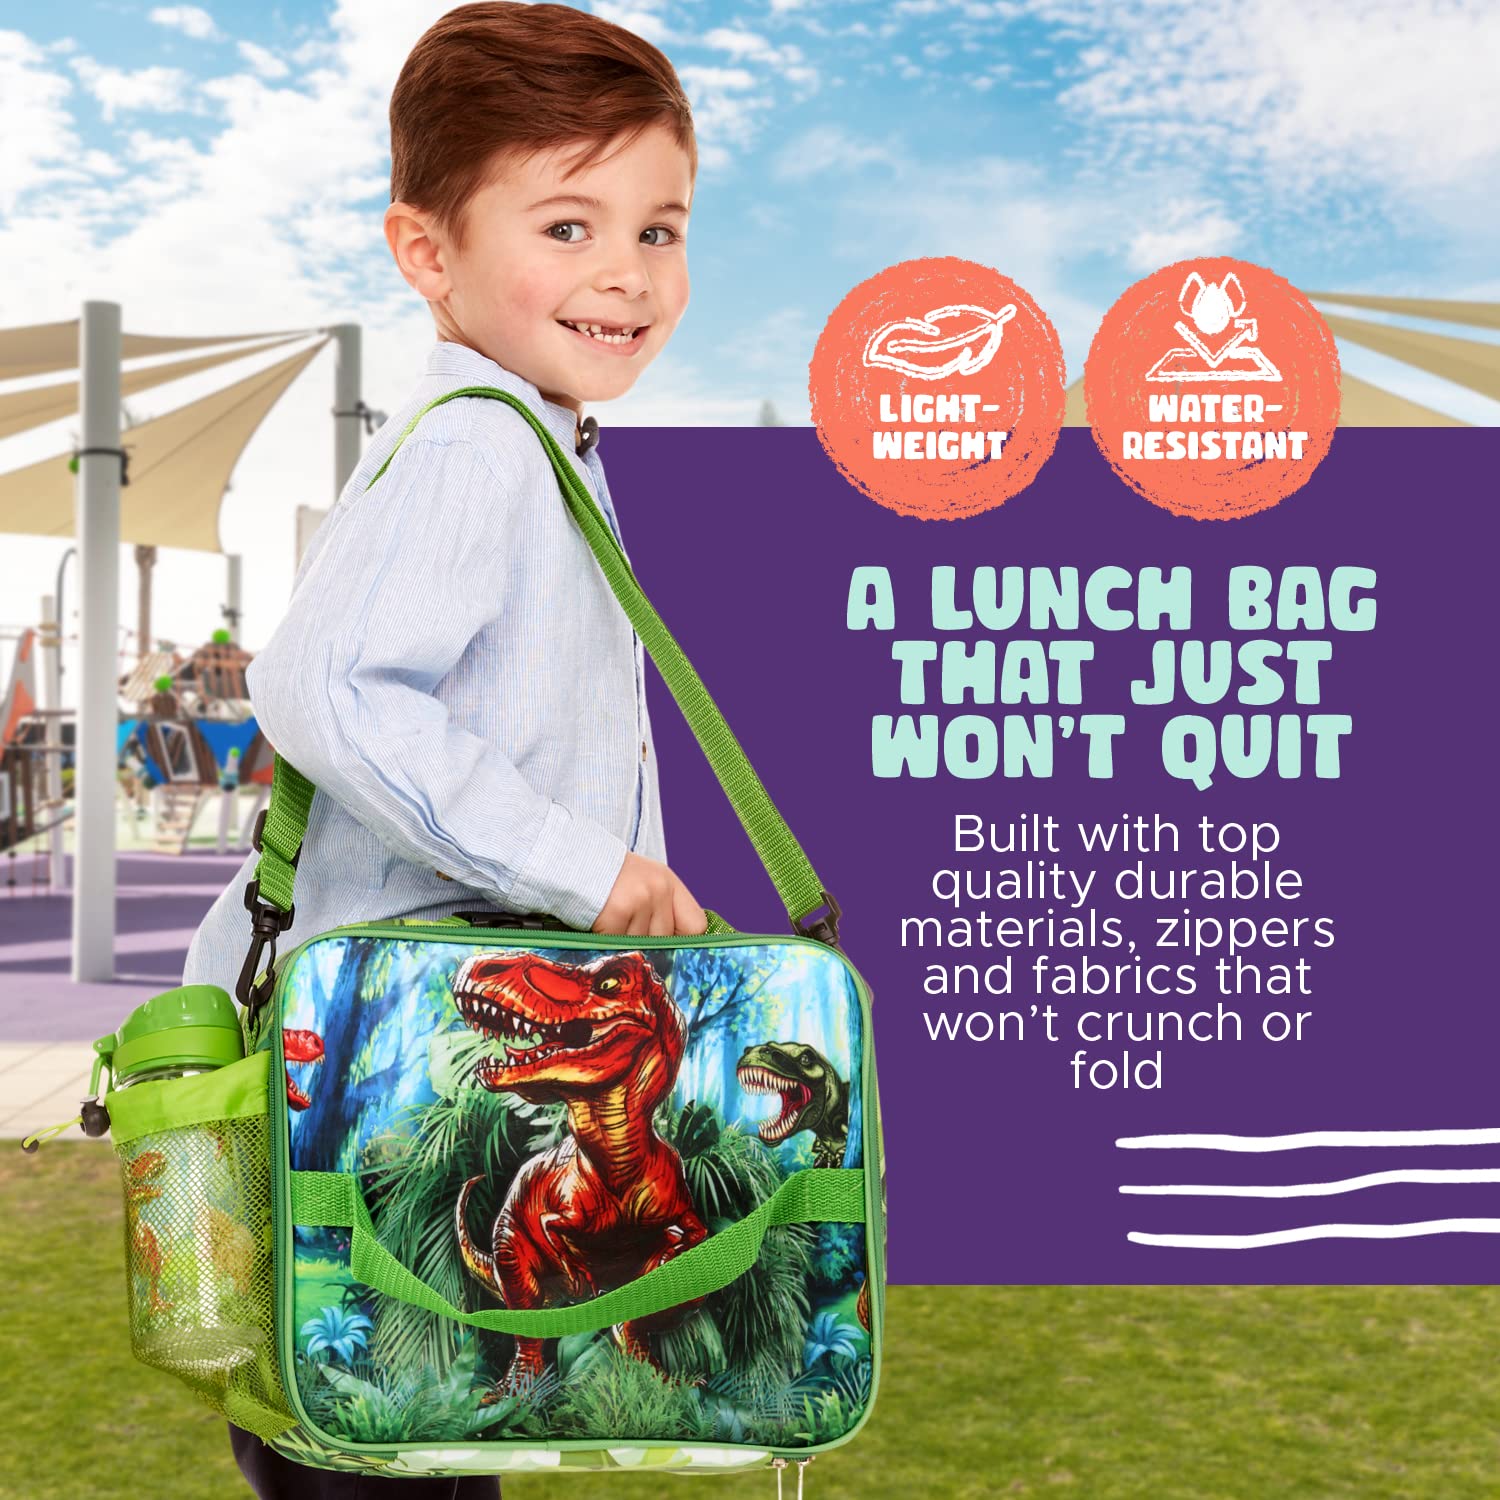 Dinosaur Lunch Box - Soft-Sided, Insulated, Gives Back to A Great Cause